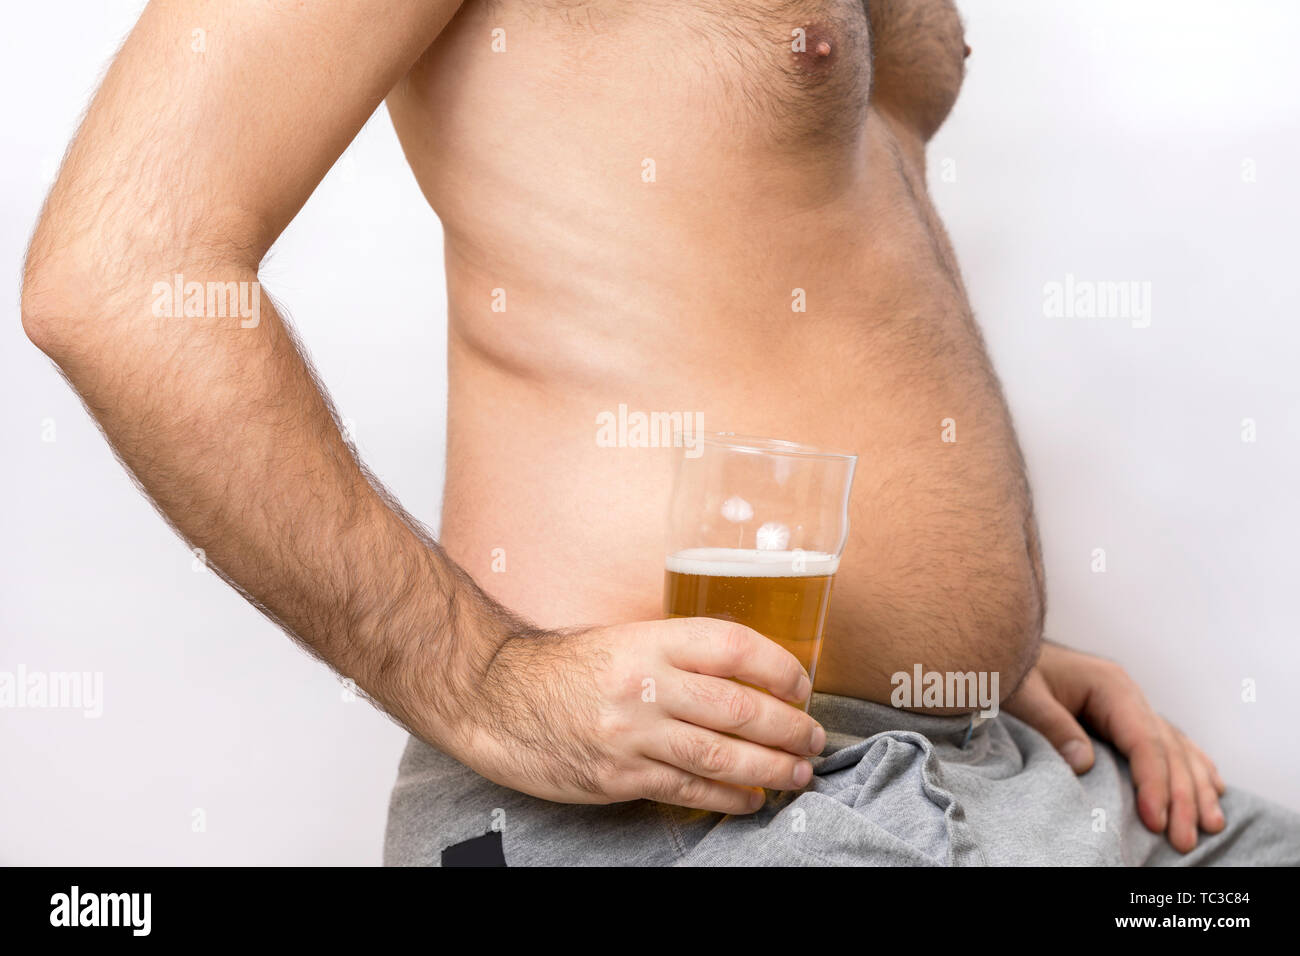 Alcohol Addicted Man with a fat belly holds a glass of beer Stock Photo